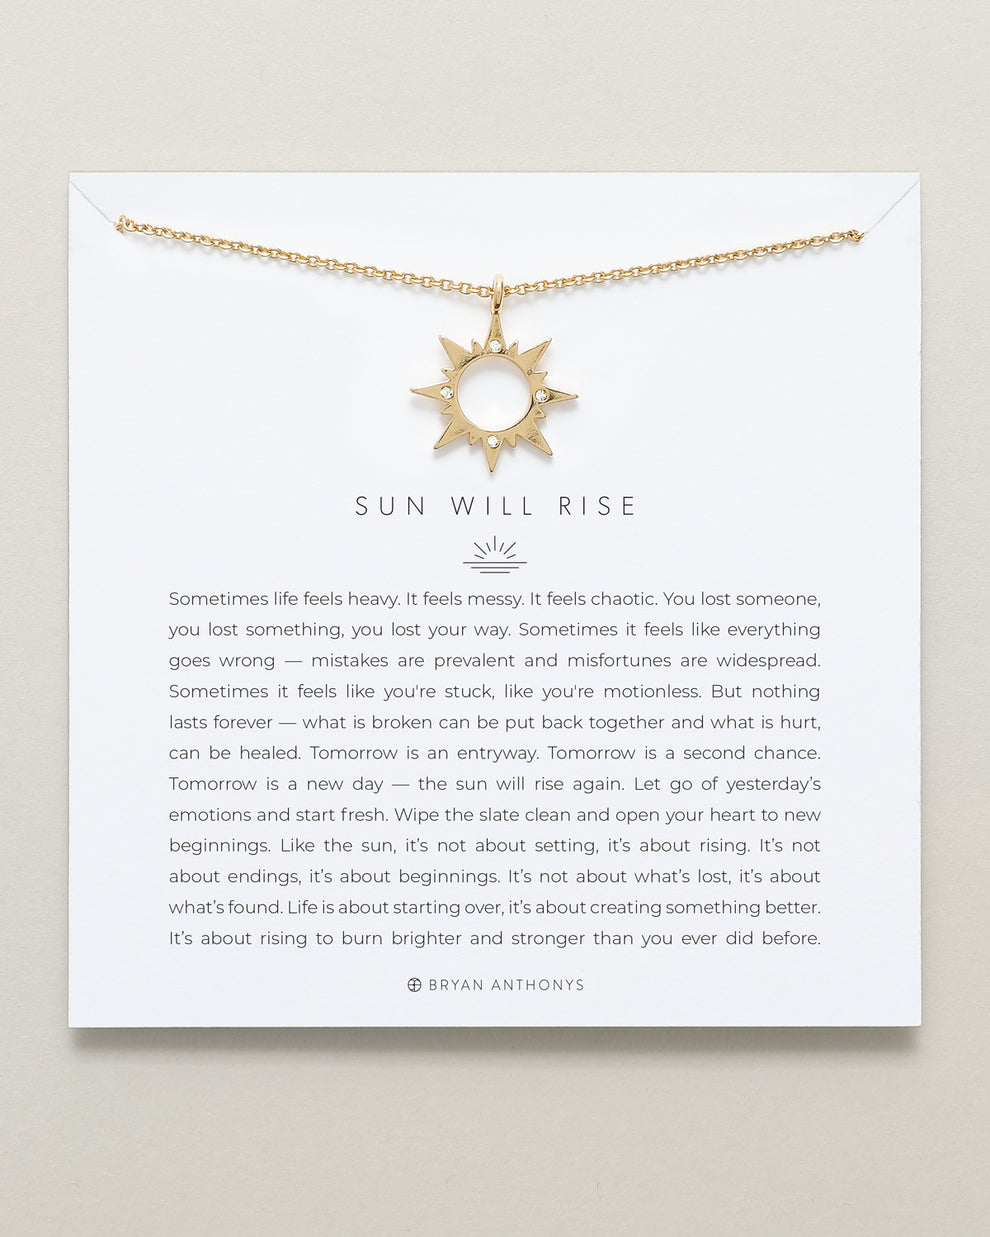 Bryan Anthonys "Sun Will Rise" Necklace-Gold